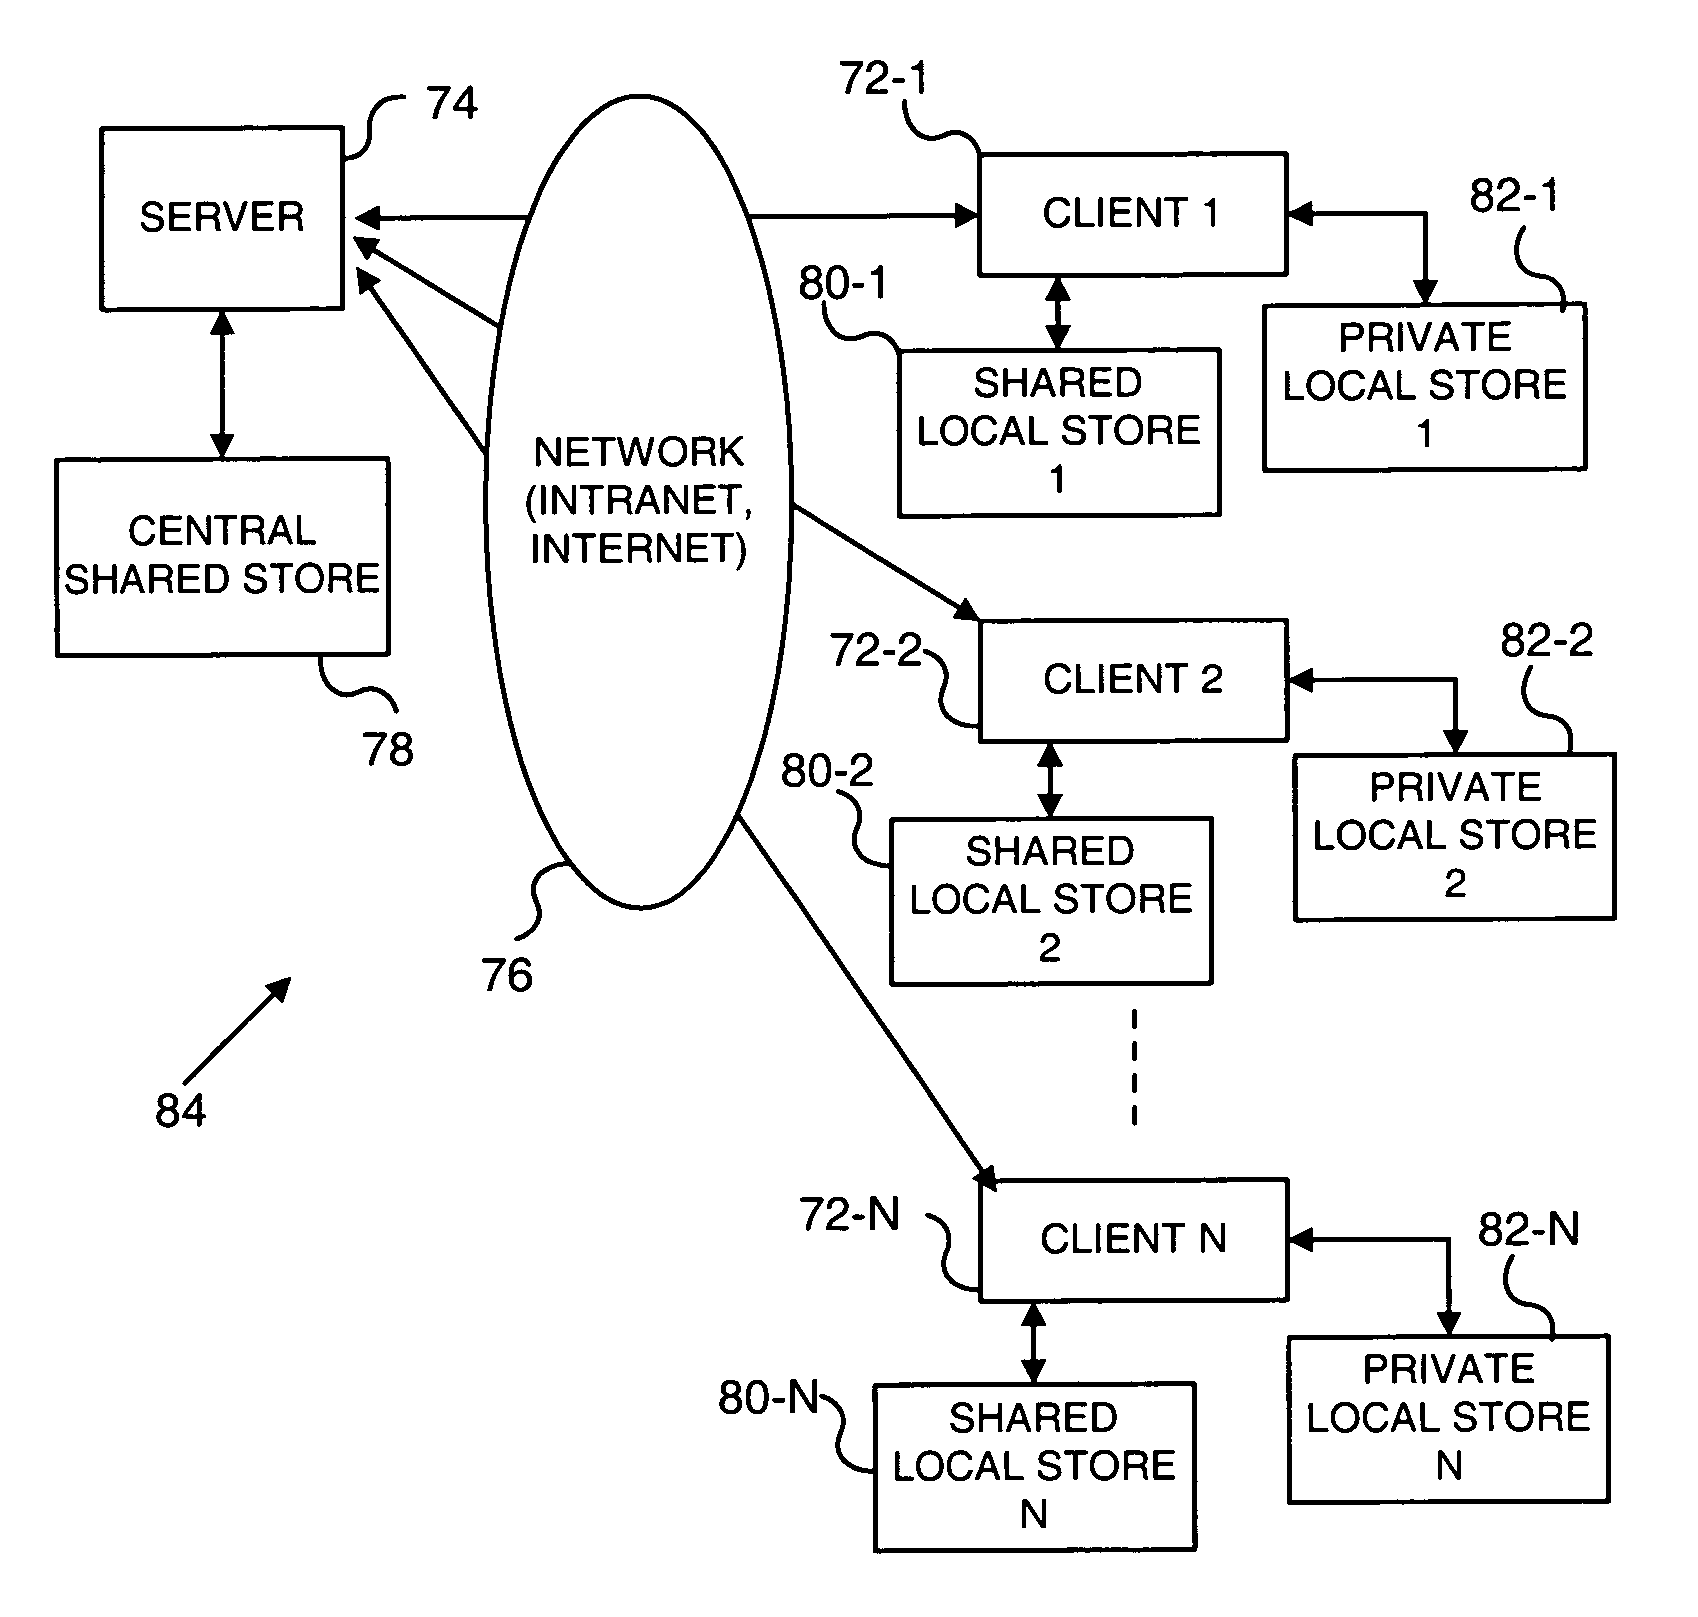 Shared and private object stores for a networked computer application communication environment